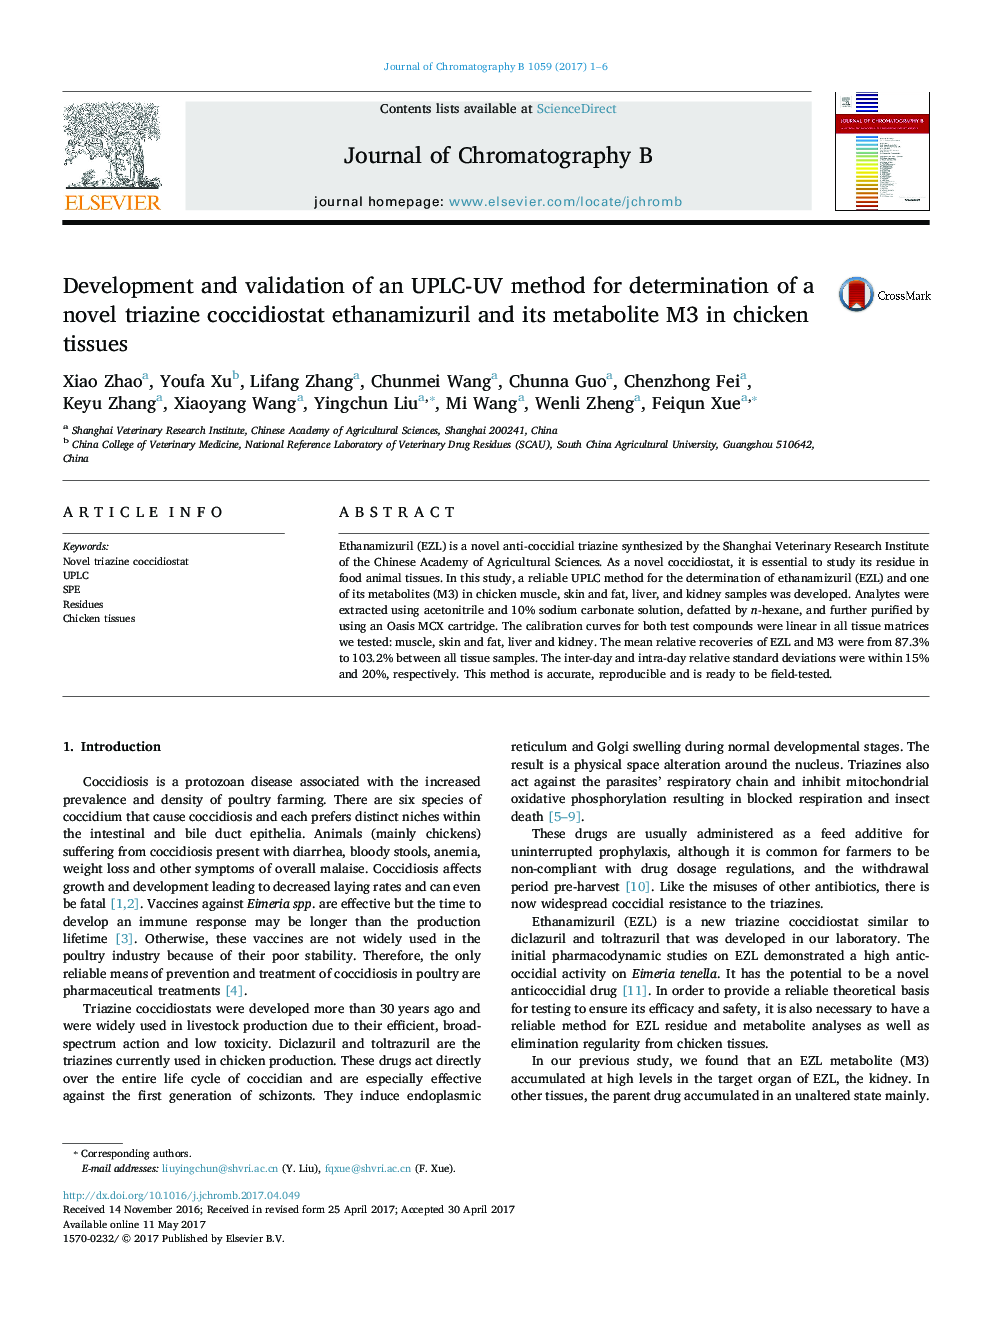 Development and validation of an UPLC-UV method for determination of a novel triazine coccidiostat ethanamizuril and its metabolite M3 in chicken tissues